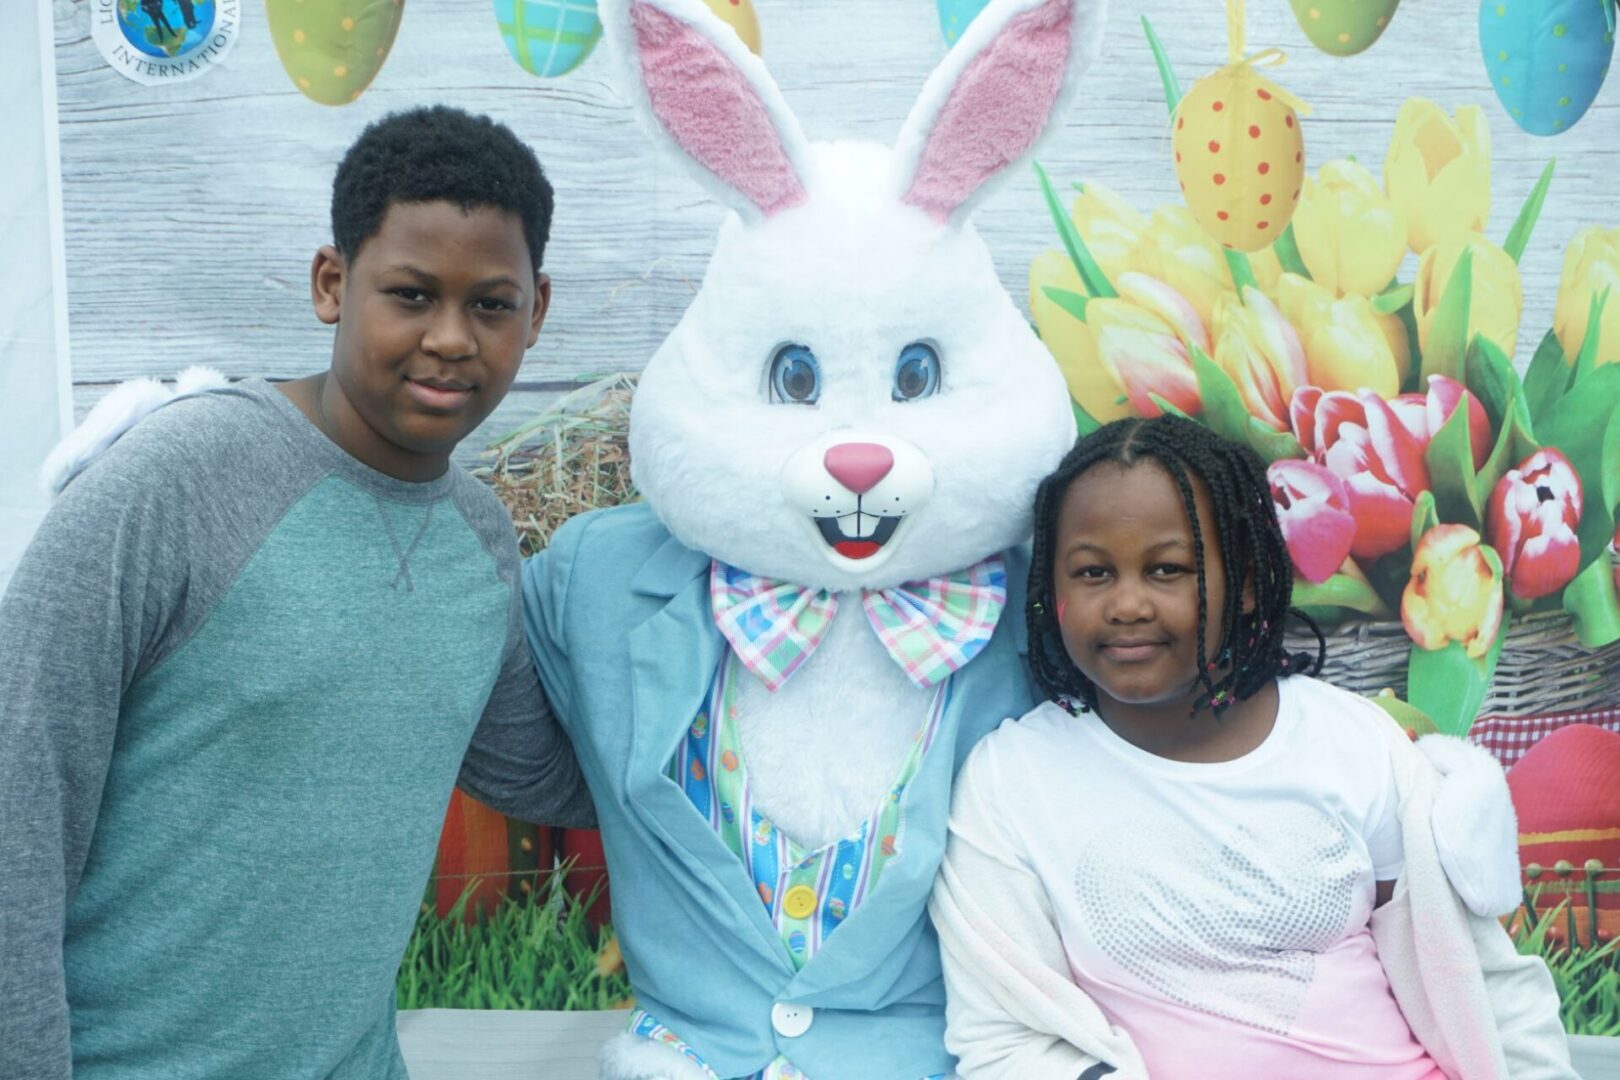 The bunny mascot together with a boy and a girl wearing blue and pink clothes, respectively (1)